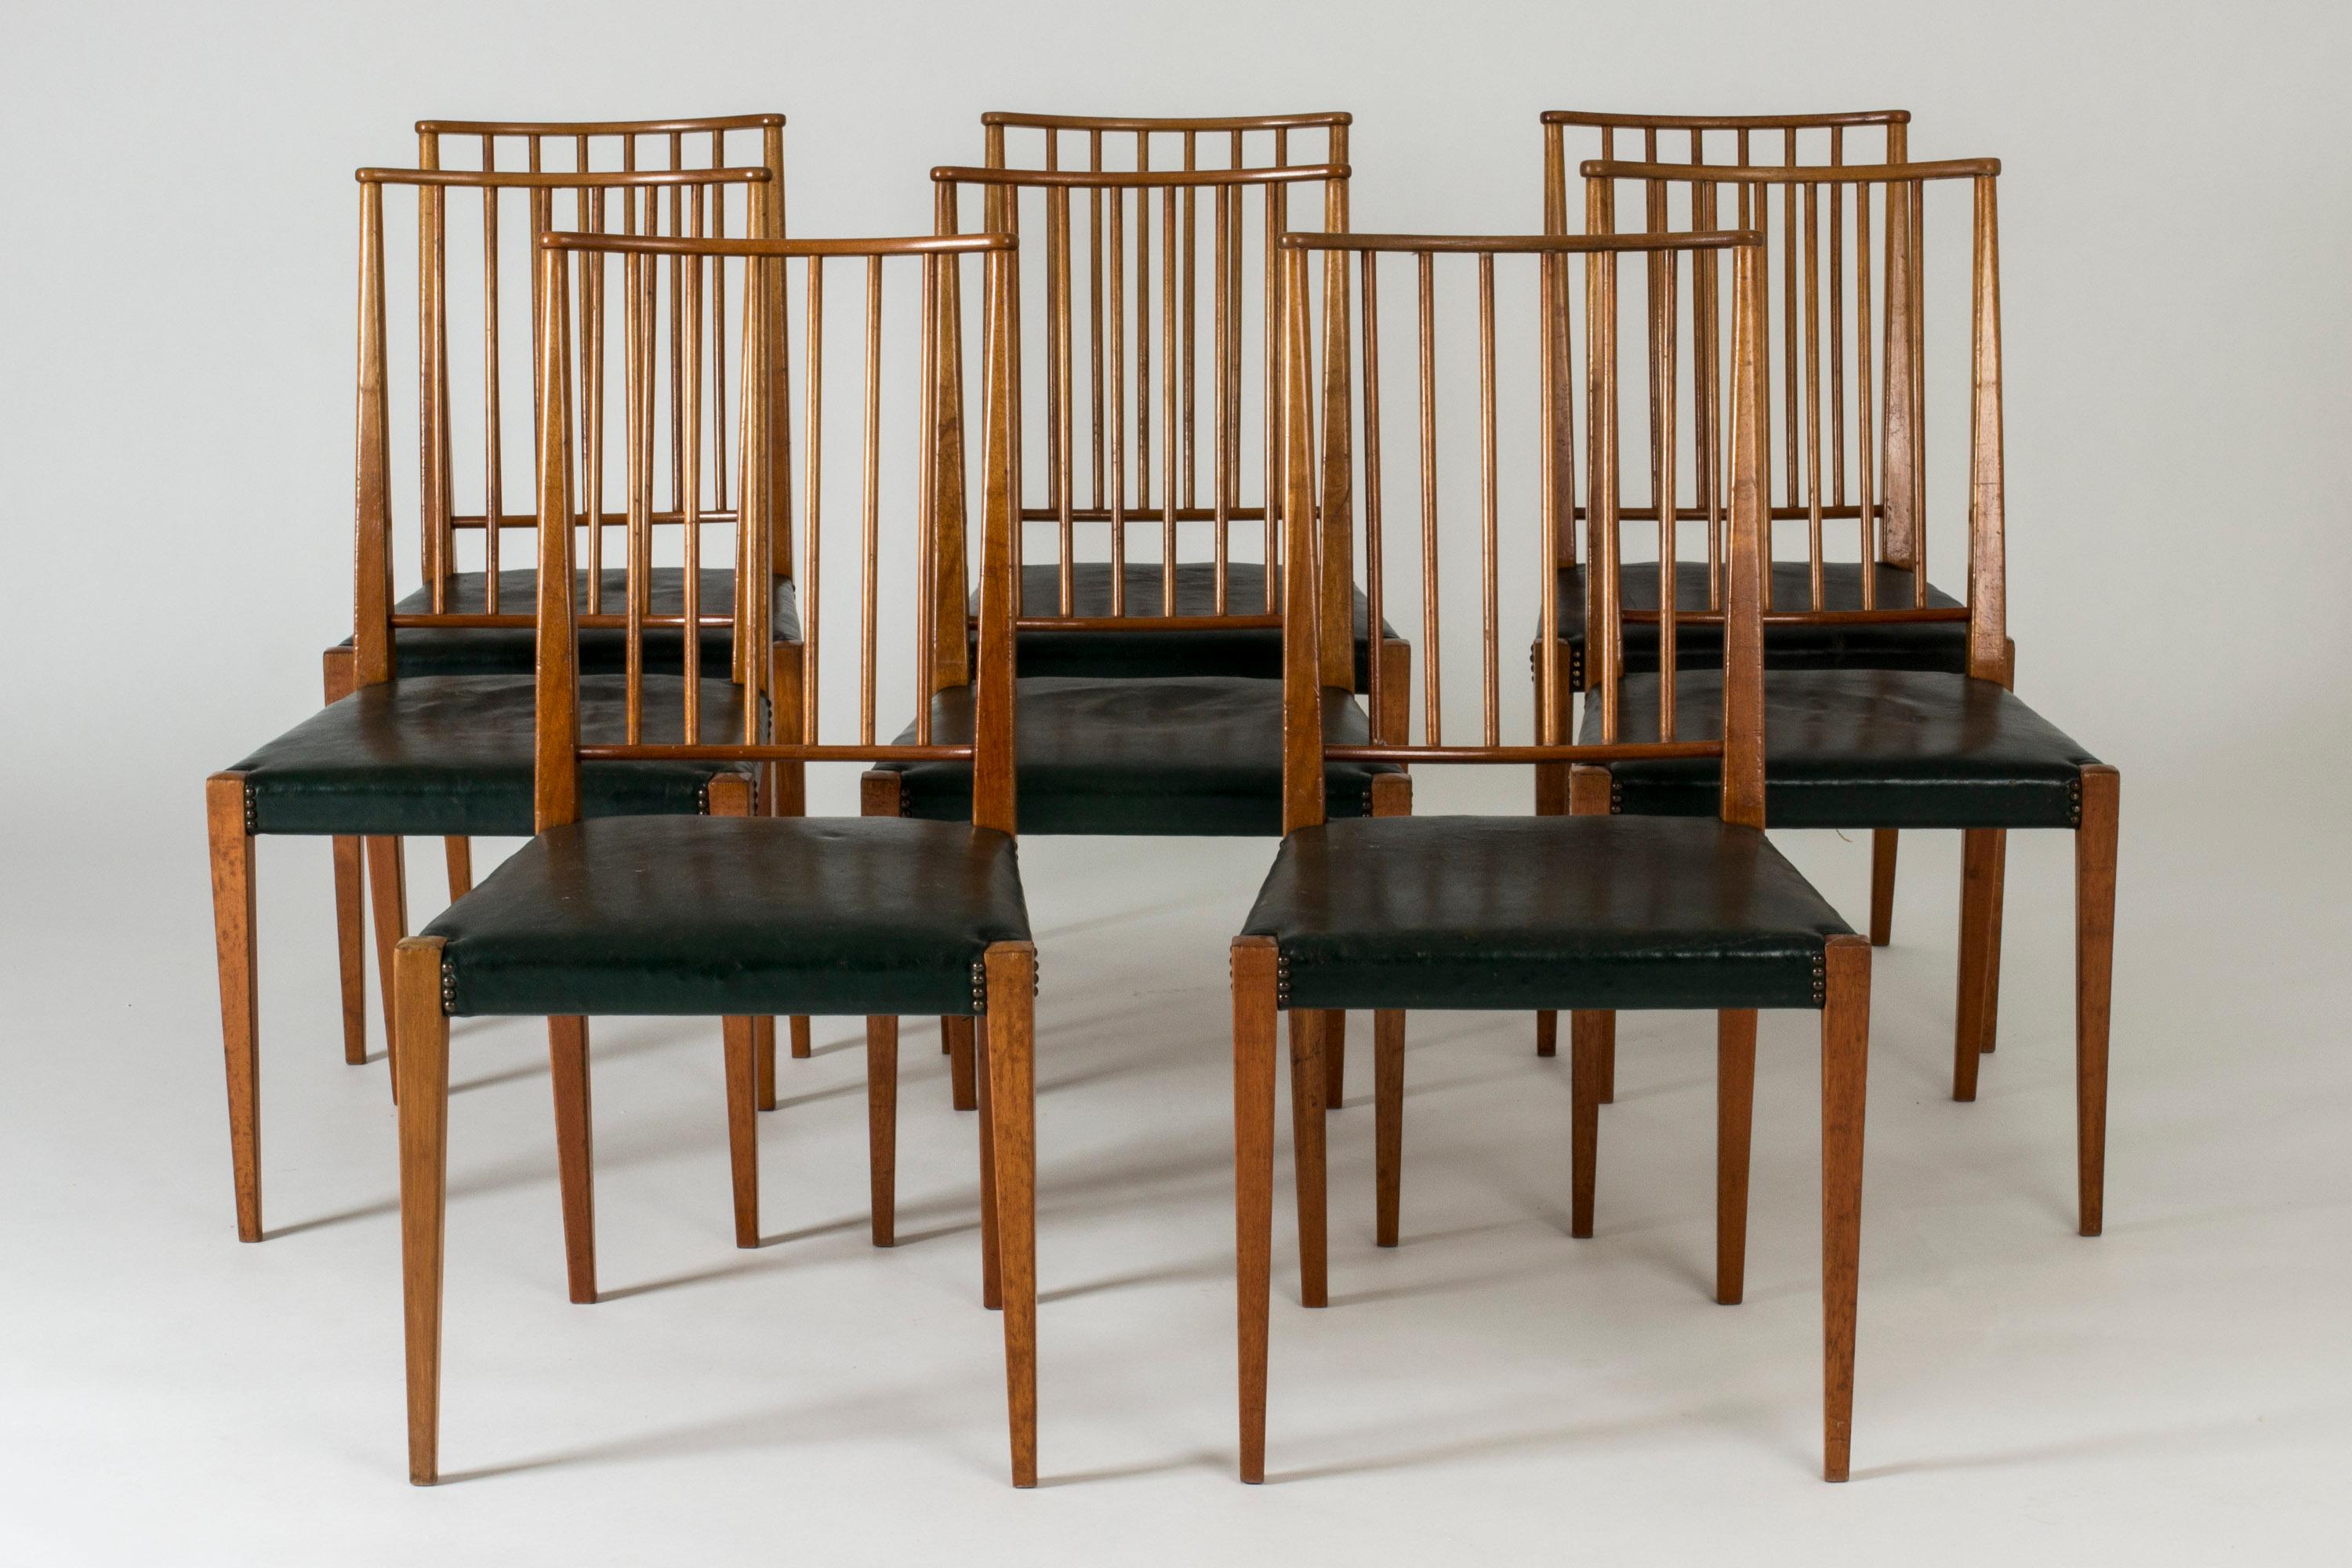 Set of eight dining chairs by Josef Frank, made from mahogany with green leather seats. Elegant slender lines with tall, ribbed backs. Decor of brass nails around the corners of the seats.
Original green leather seats, some with patina and small